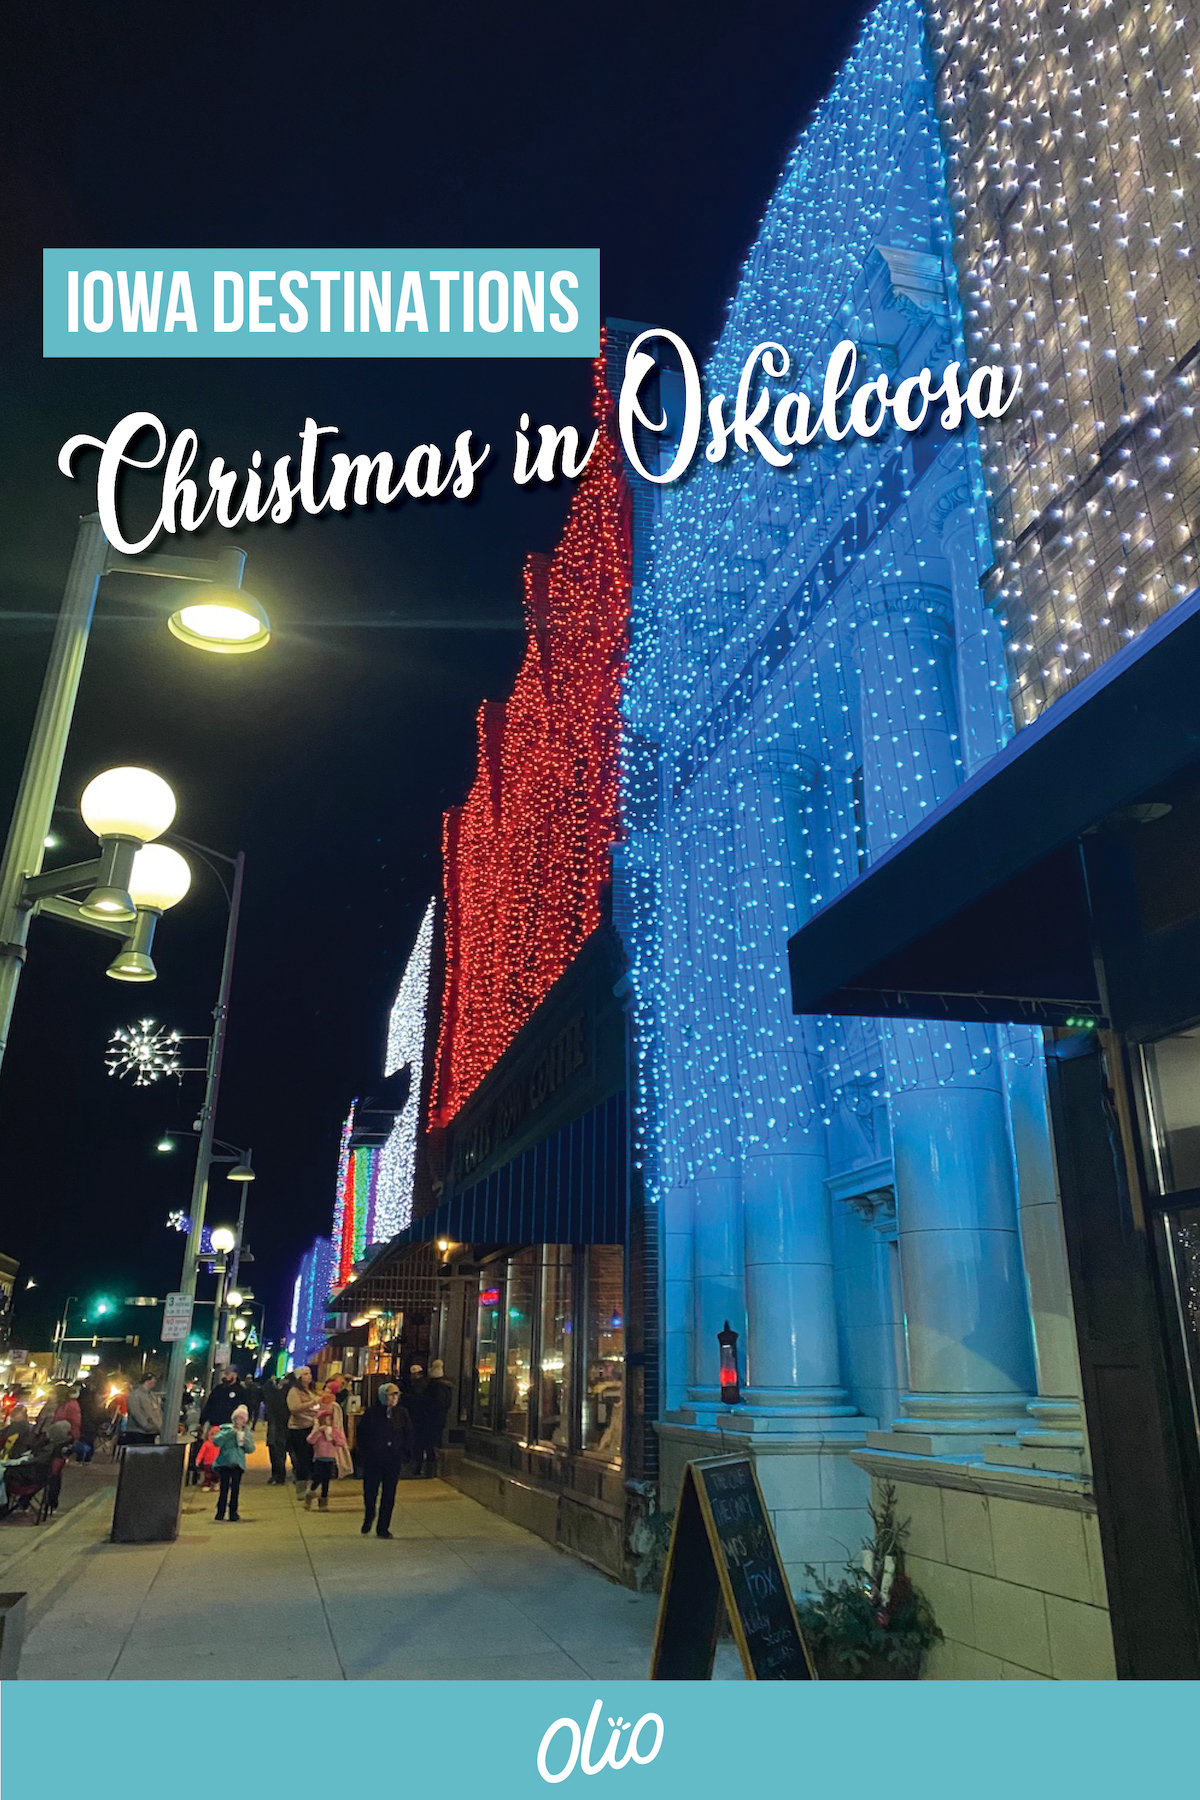 Light up your holiday season with a visit to southern Iowa! There are so many things to do in Oskaloosa, Iowa, especially during the holiday season. From the annual Lighted Christmas Parade to incredible local boutiques to get your holiday shopping done, this small town packs some serious Christmas cheer. Discover why you need to plan a holiday visit to Oskaloosa, Iowa!